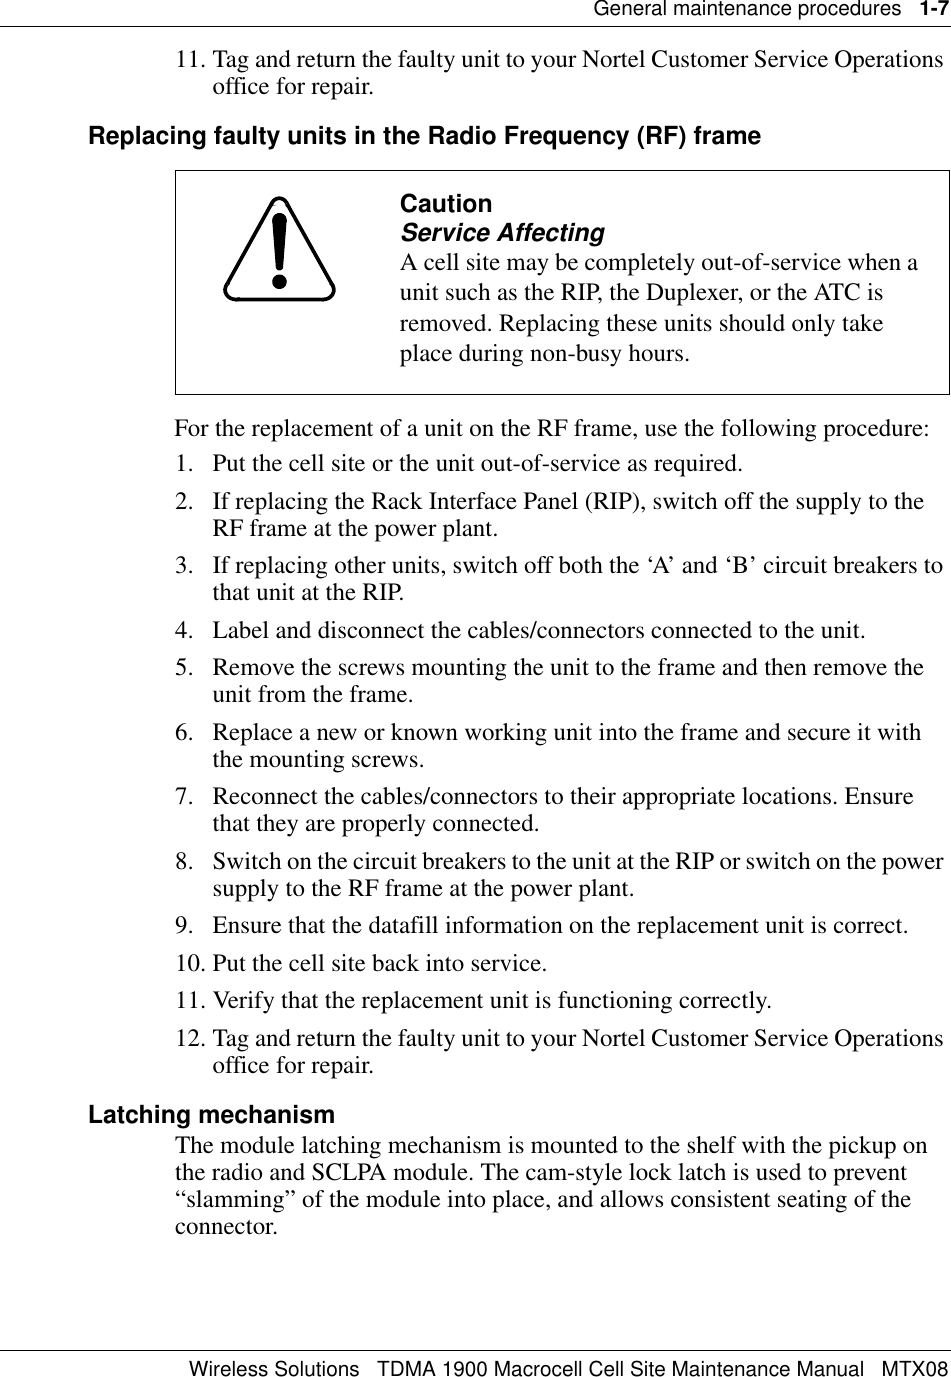 General maintenance procedures   1-7Wireless Solutions   TDMA 1900 Macrocell Cell Site Maintenance Manual   MTX0811. Tag and return the faulty unit to your Nortel Customer Service Operations office for repair.Replacing faulty units in the Radio Frequency (RF) frameFor the replacement of a unit on the RF frame, use the following procedure:1. Put the cell site or the unit out-of-service as required.2. If replacing the Rack Interface Panel (RIP), switch off the supply to the RF frame at the power plant.3. If replacing other units, switch off both the ‘A’ and ‘B’ circuit breakers to that unit at the RIP.4. Label and disconnect the cables/connectors connected to the unit.5. Remove the screws mounting the unit to the frame and then remove the unit from the frame.6. Replace a new or known working unit into the frame and secure it with the mounting screws.7. Reconnect the cables/connectors to their appropriate locations. Ensure that they are properly connected.8. Switch on the circuit breakers to the unit at the RIP or switch on the power supply to the RF frame at the power plant.9. Ensure that the datafill information on the replacement unit is correct.10. Put the cell site back into service.11. Verify that the replacement unit is functioning correctly.12. Tag and return the faulty unit to your Nortel Customer Service Operations office for repair.Latching mechanismThe module latching mechanism is mounted to the shelf with the pickup on the radio and SCLPA module. The cam-style lock latch is used to prevent “slamming” of the module into place, and allows consistent seating of the connector.CautionService AffectingA cell site may be completely out-of-service when a unit such as the RIP, the Duplexer, or the ATC is removed. Replacing these units should only take place during non-busy hours.